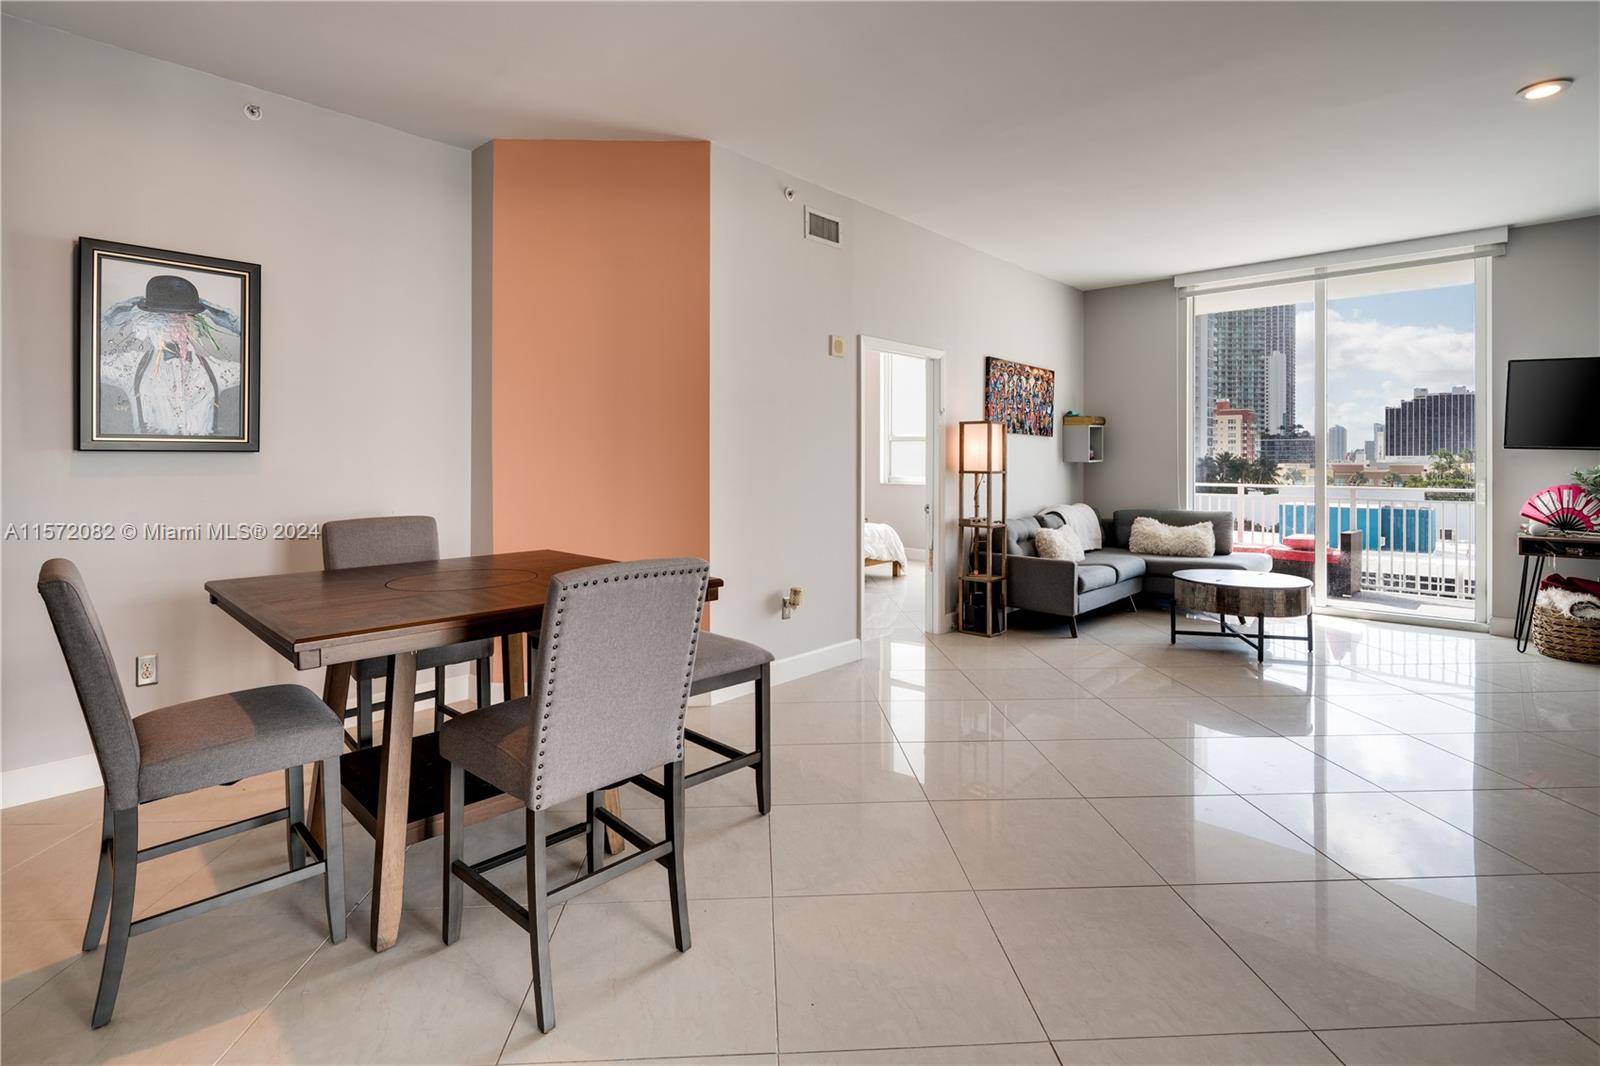 Bright and spacious corner unit in the heart of Edgewater.